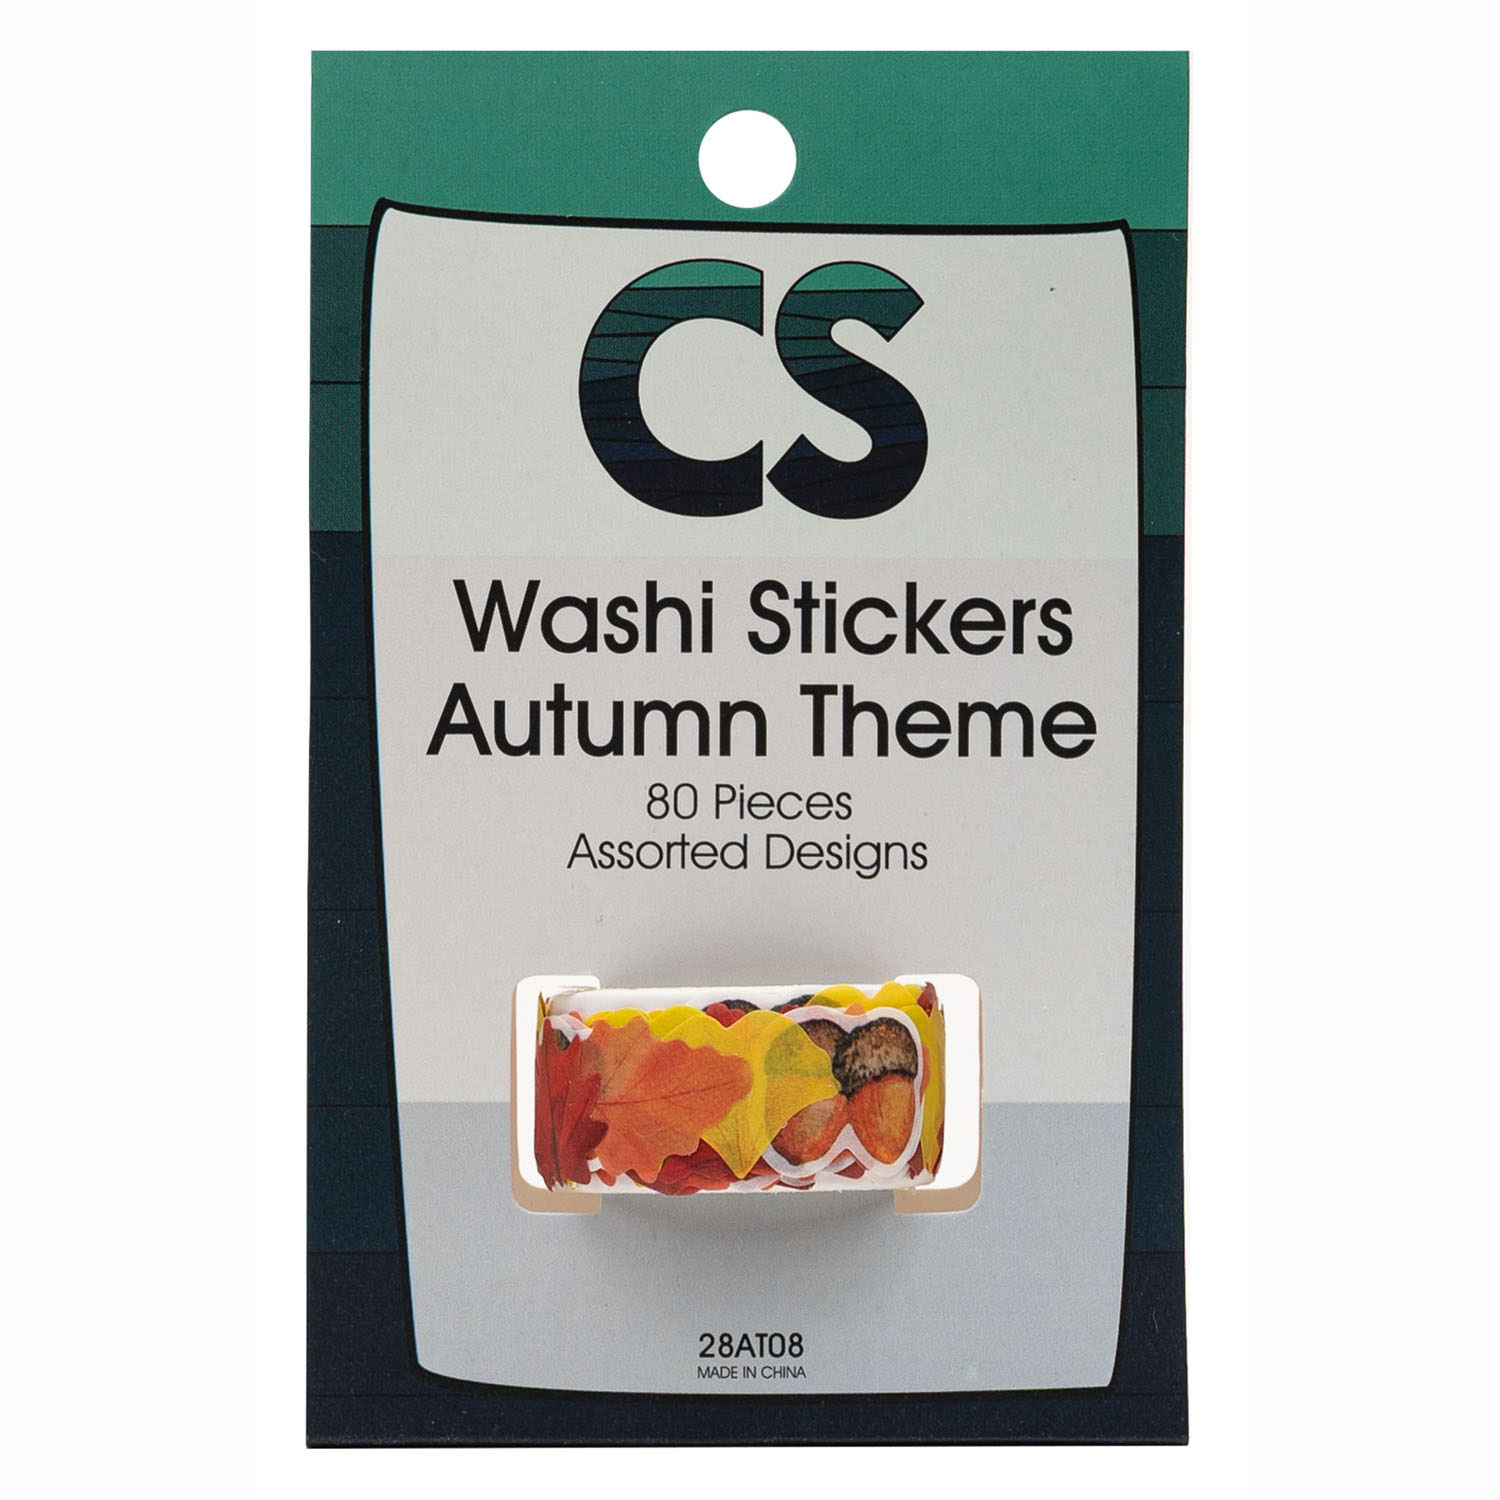 Colorations - Washi Stickers Herfstthema op Rol, 80st.